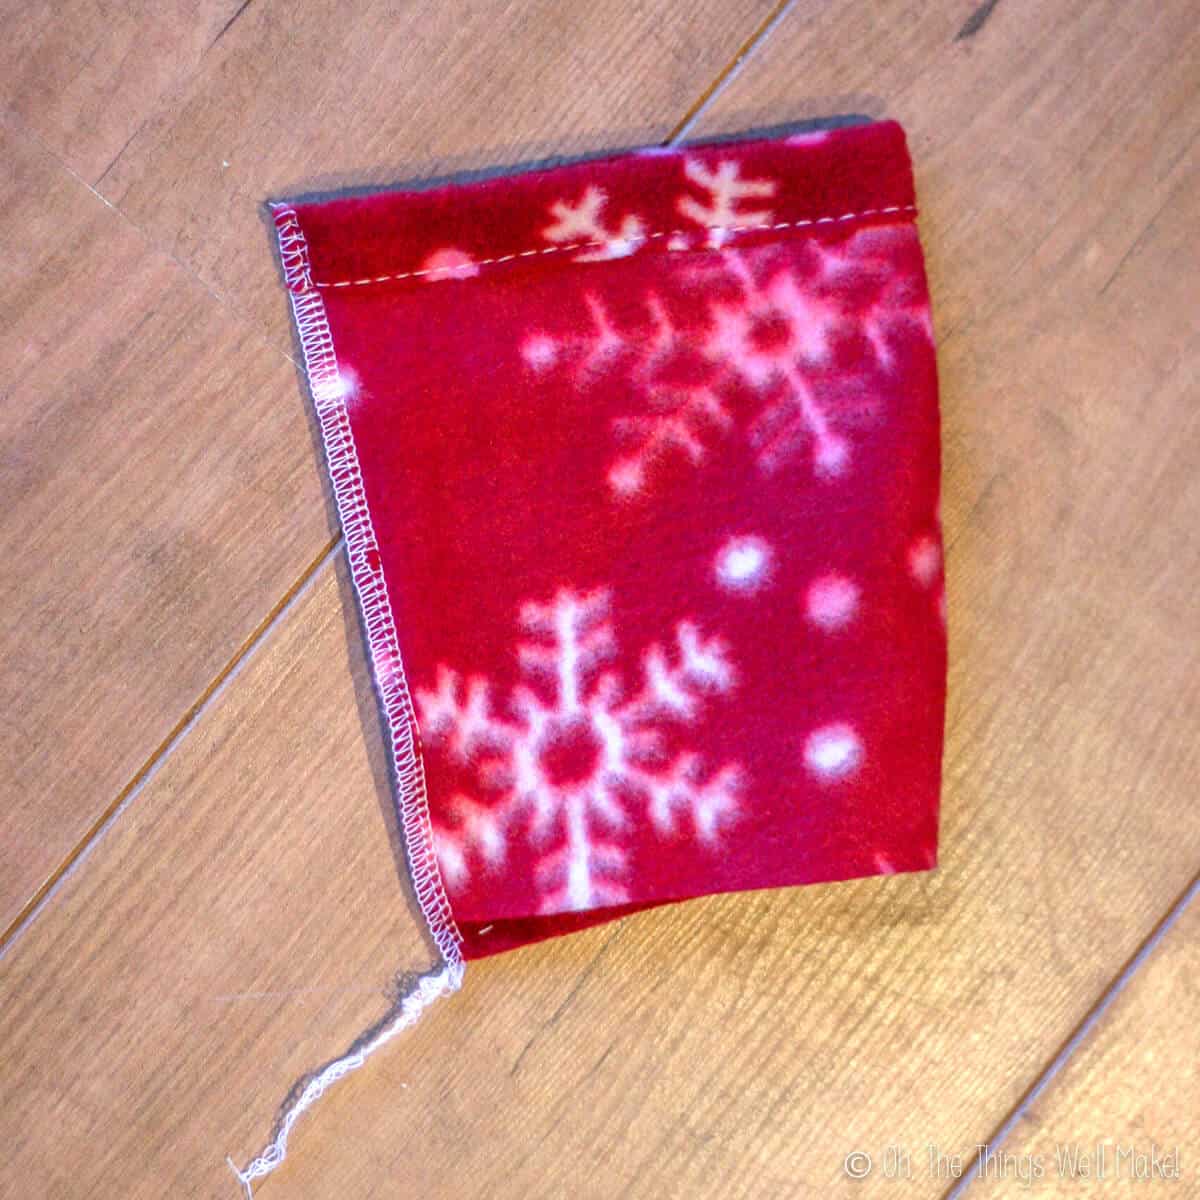 Top view of a red with white snowflakes polar fleece sleeve after having the edges sewn together.